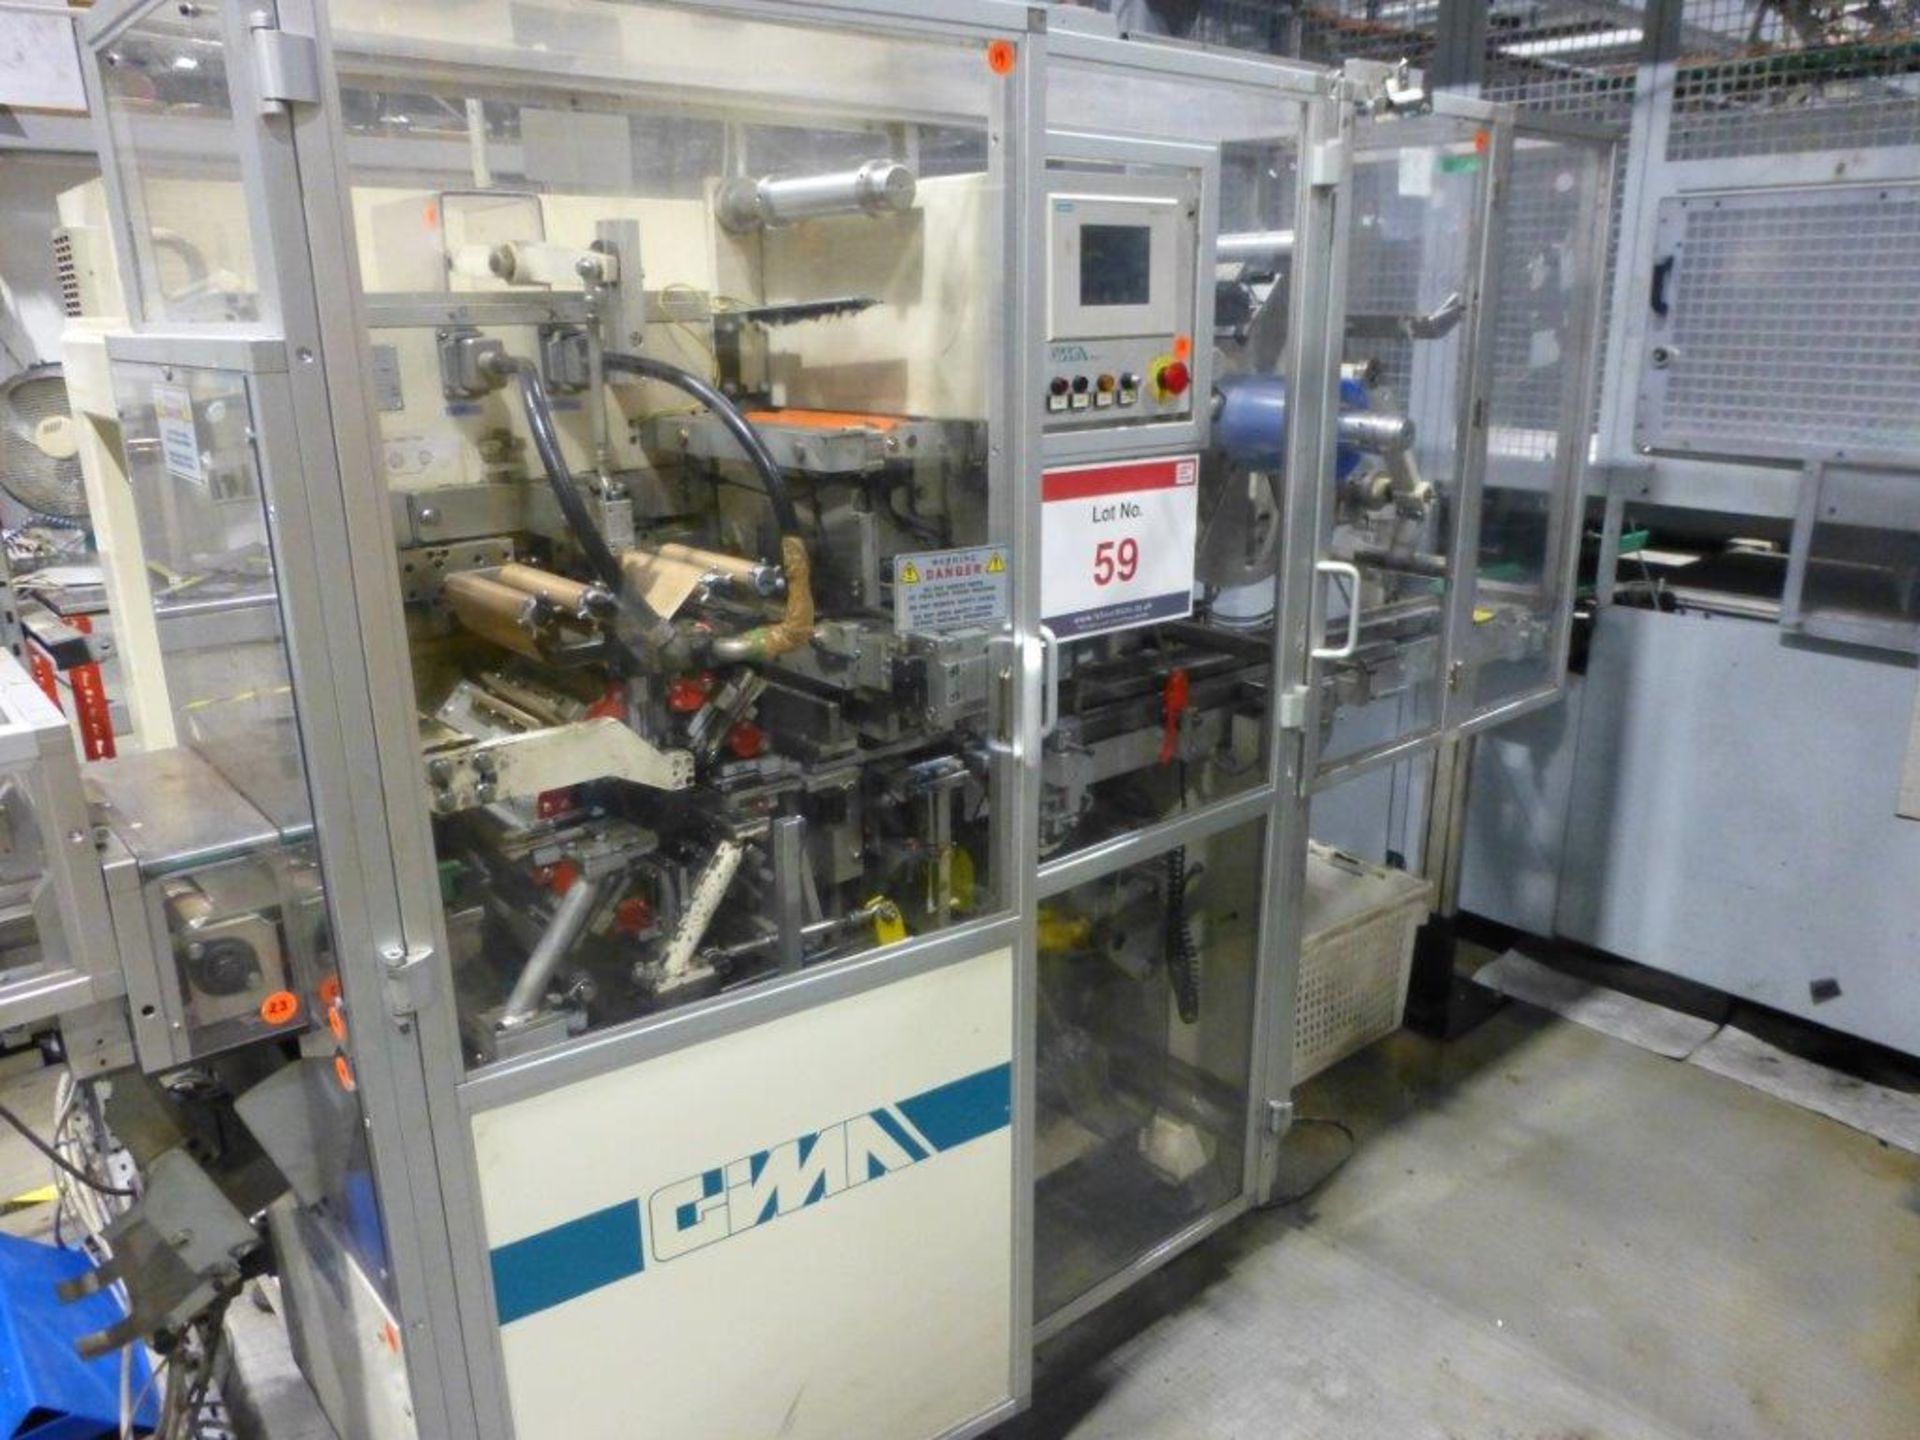 GIMA Type 884 DVD CNC Rotary Thermal Welding Machine Serial No. 88455FO (2003) with turnover unit.